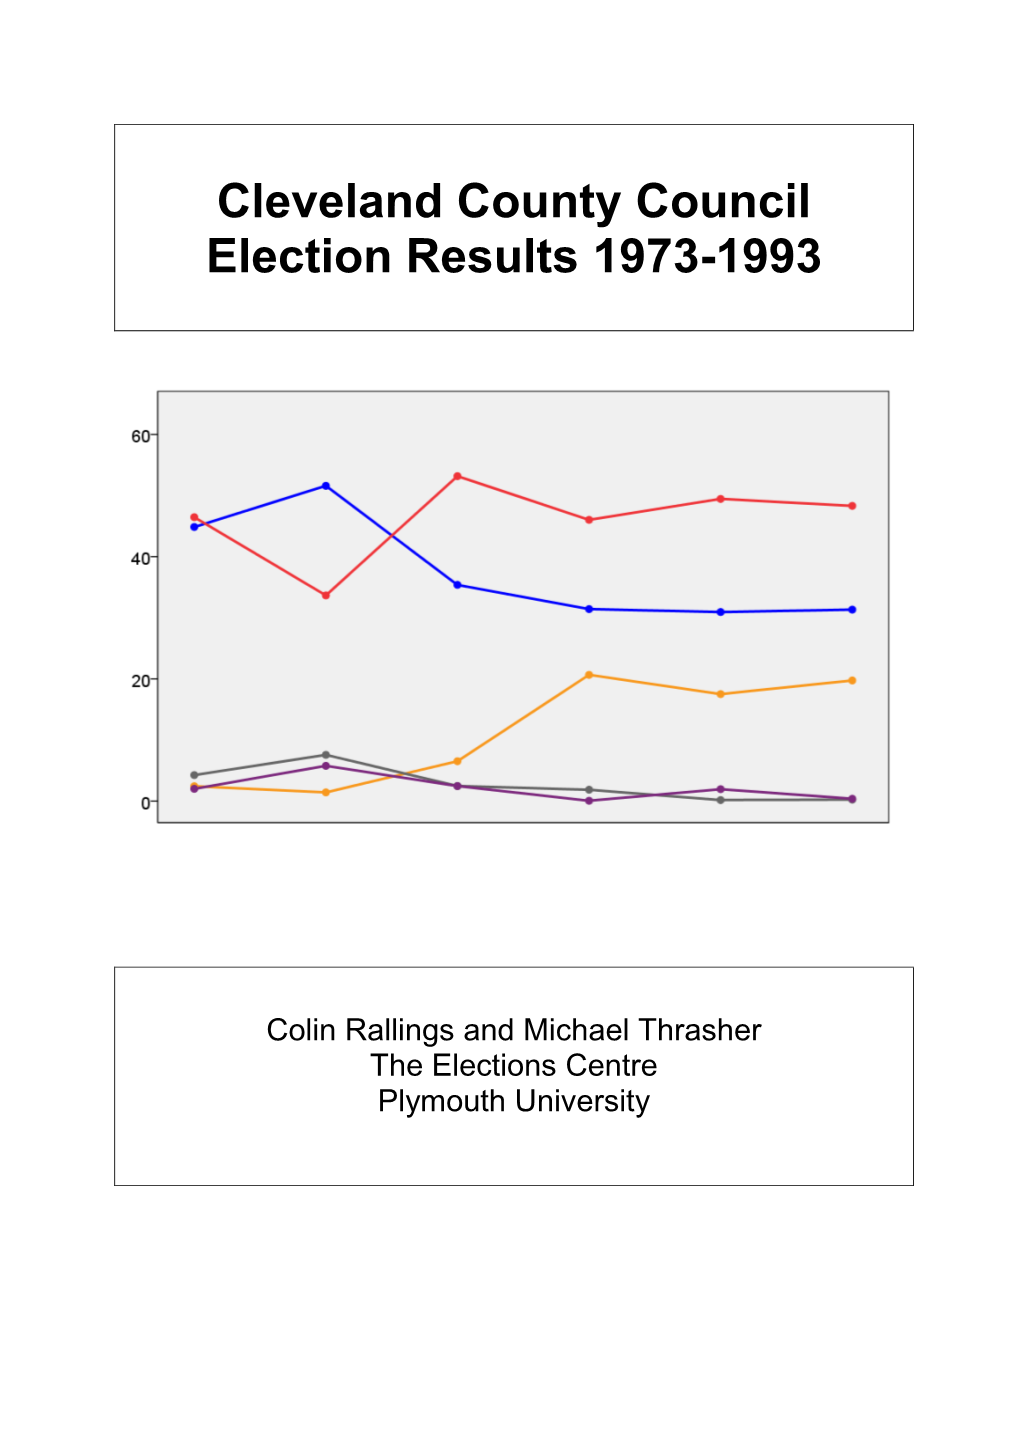 Cleveland County Council Election Results 1973-1993